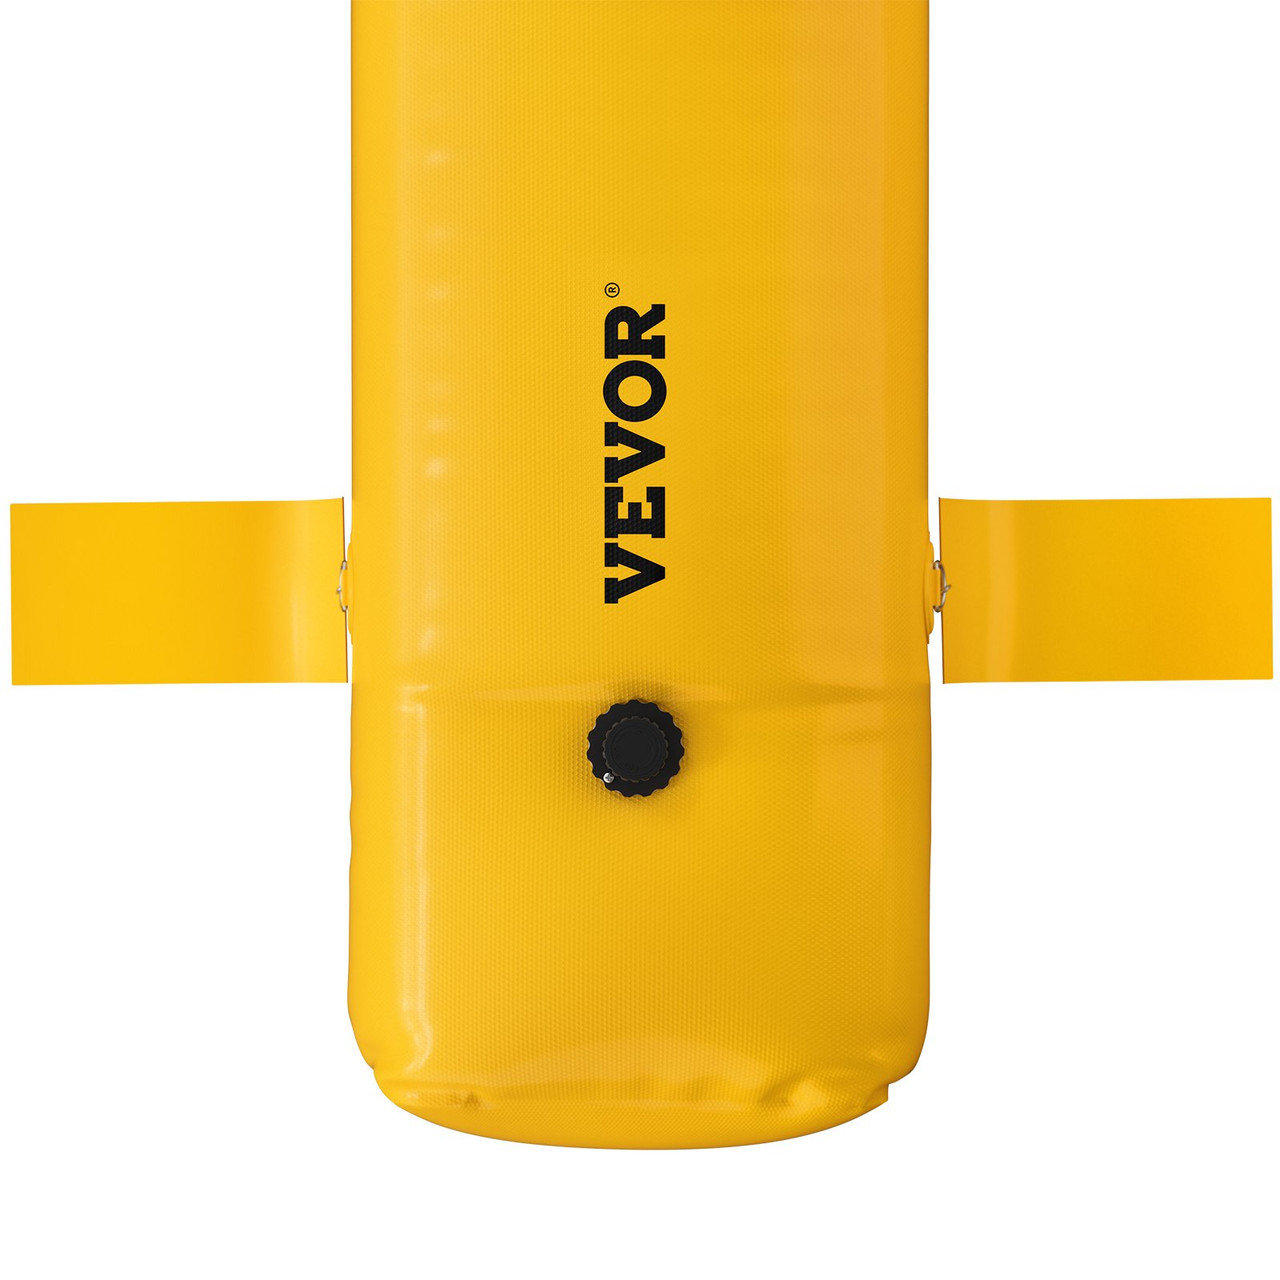 VEVOR Flood Bag, 24 ft Length x 12 in Height, Reusable PVC Water Diversion Tubes, Lightweight with Excellent Waterproof Effect Used for Doorways, Garages, Yellow